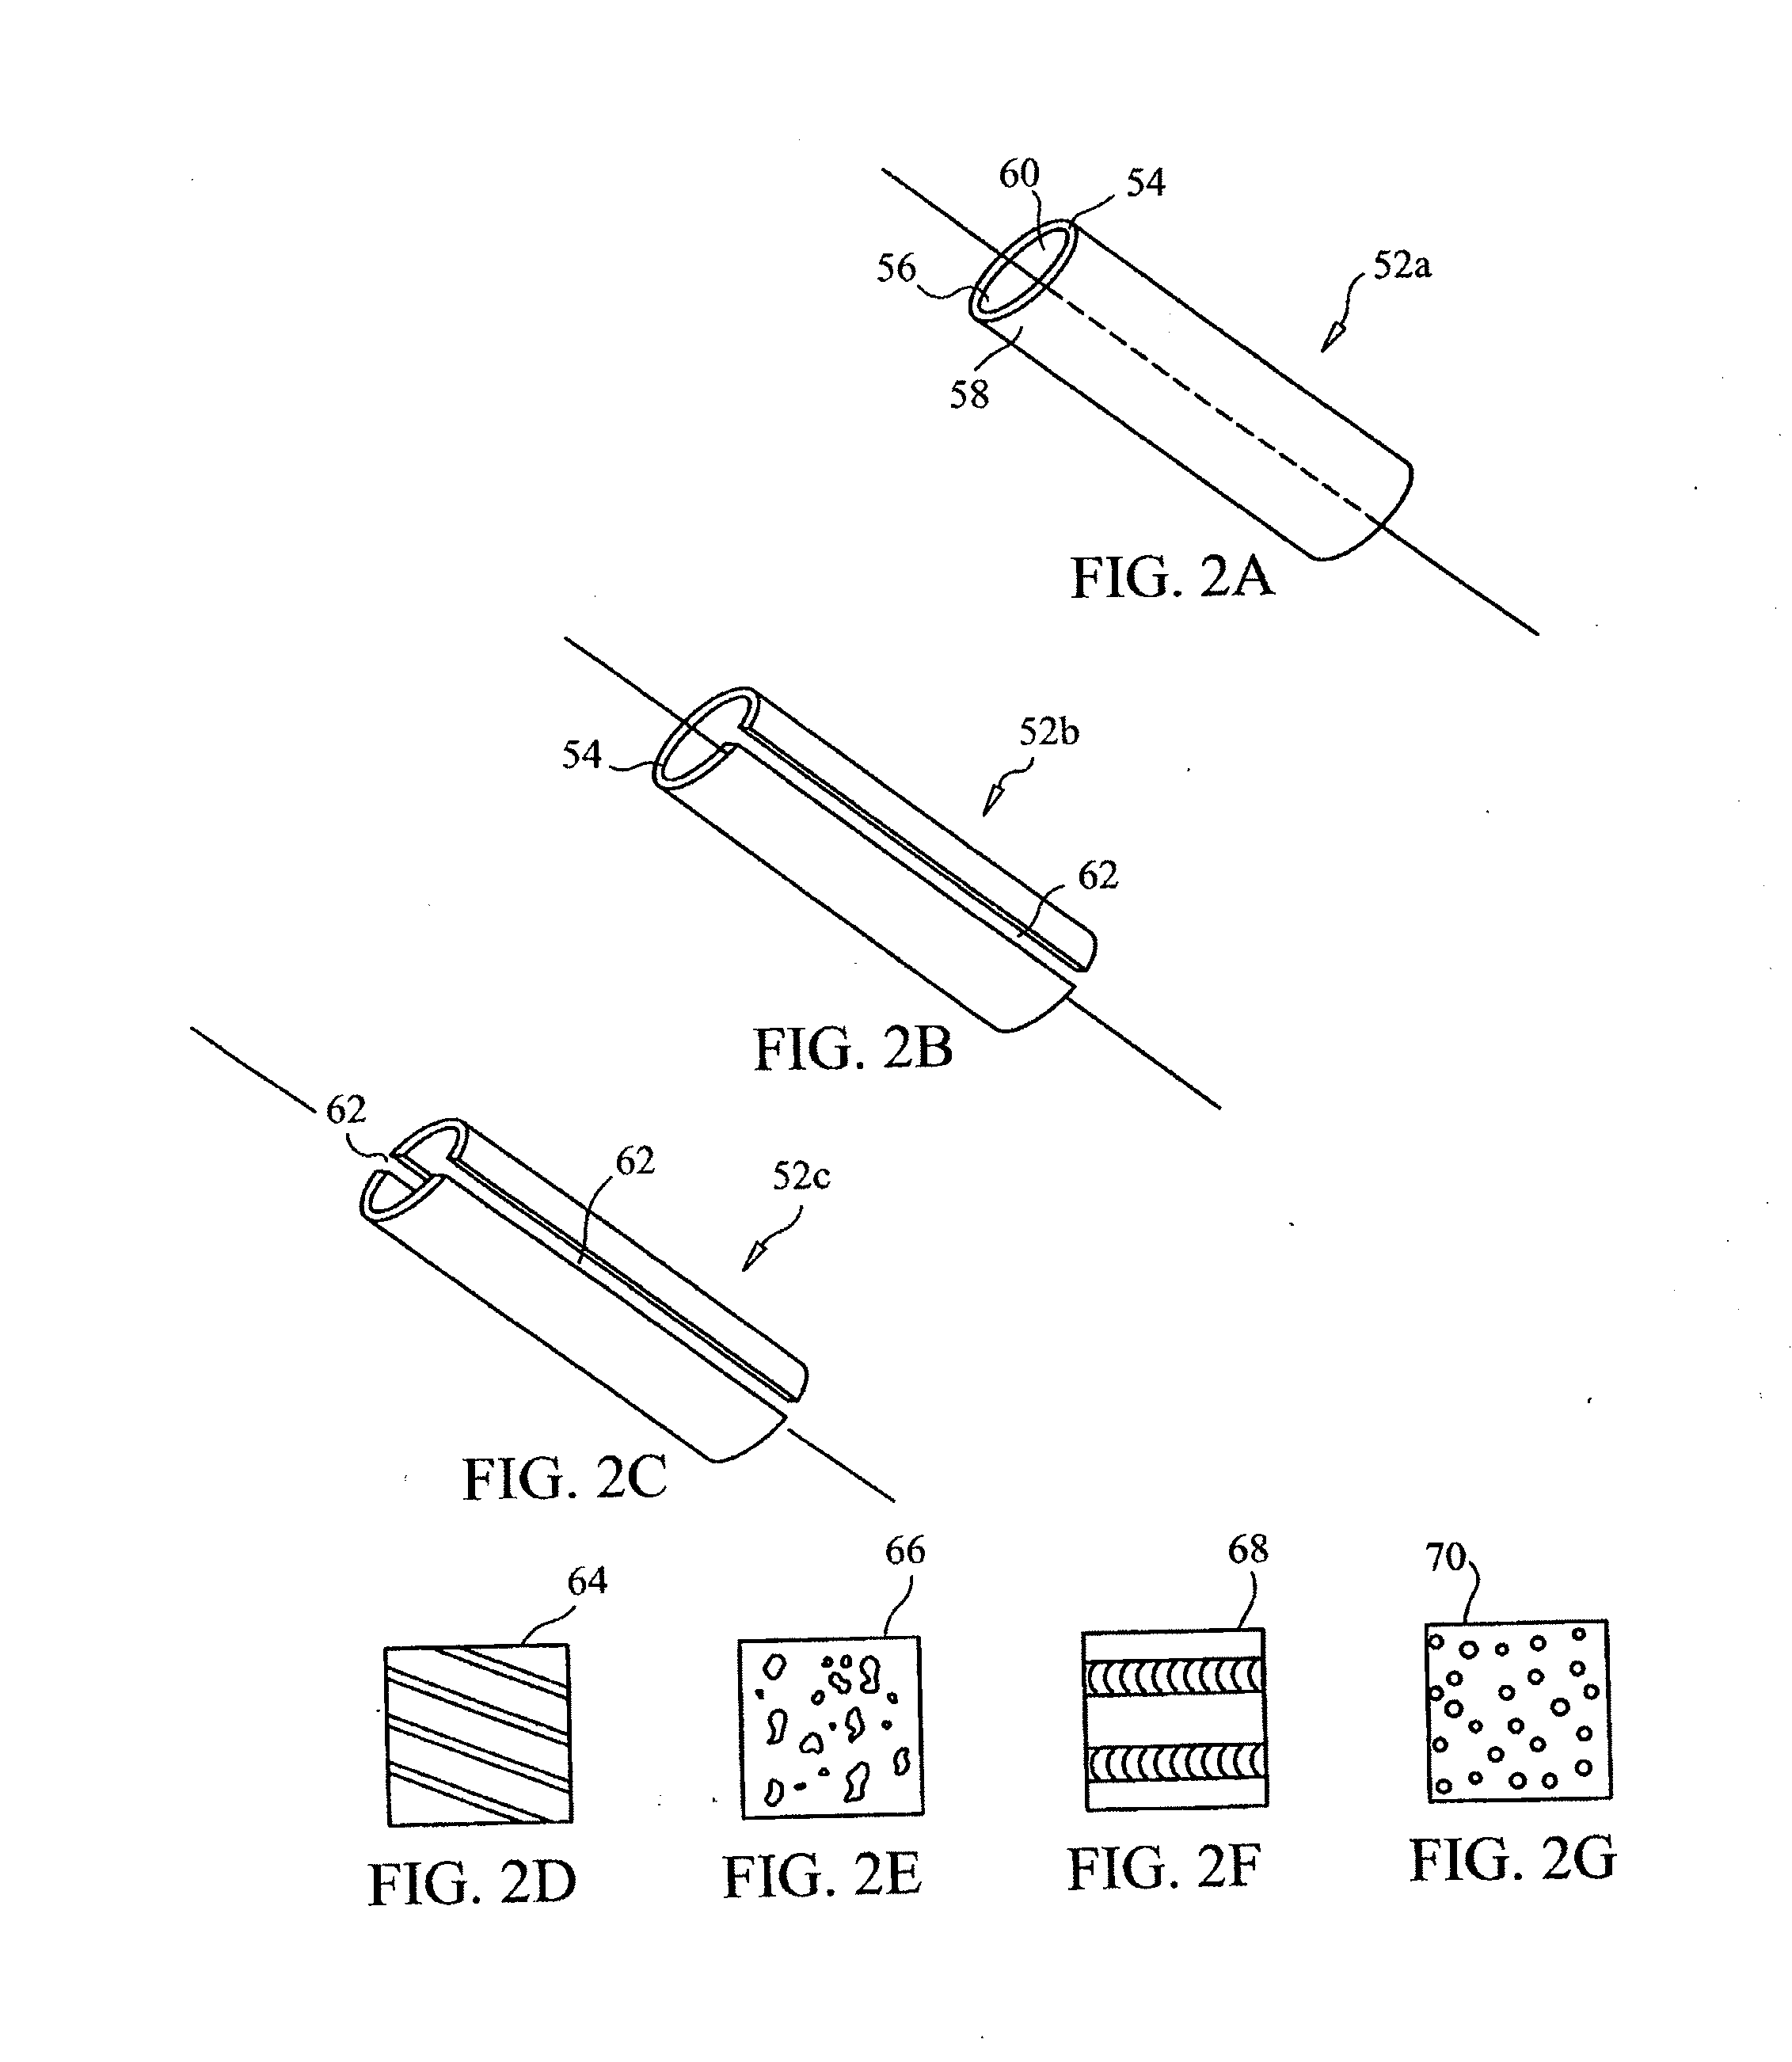 Devices and methods for stabilizing tissue and implants